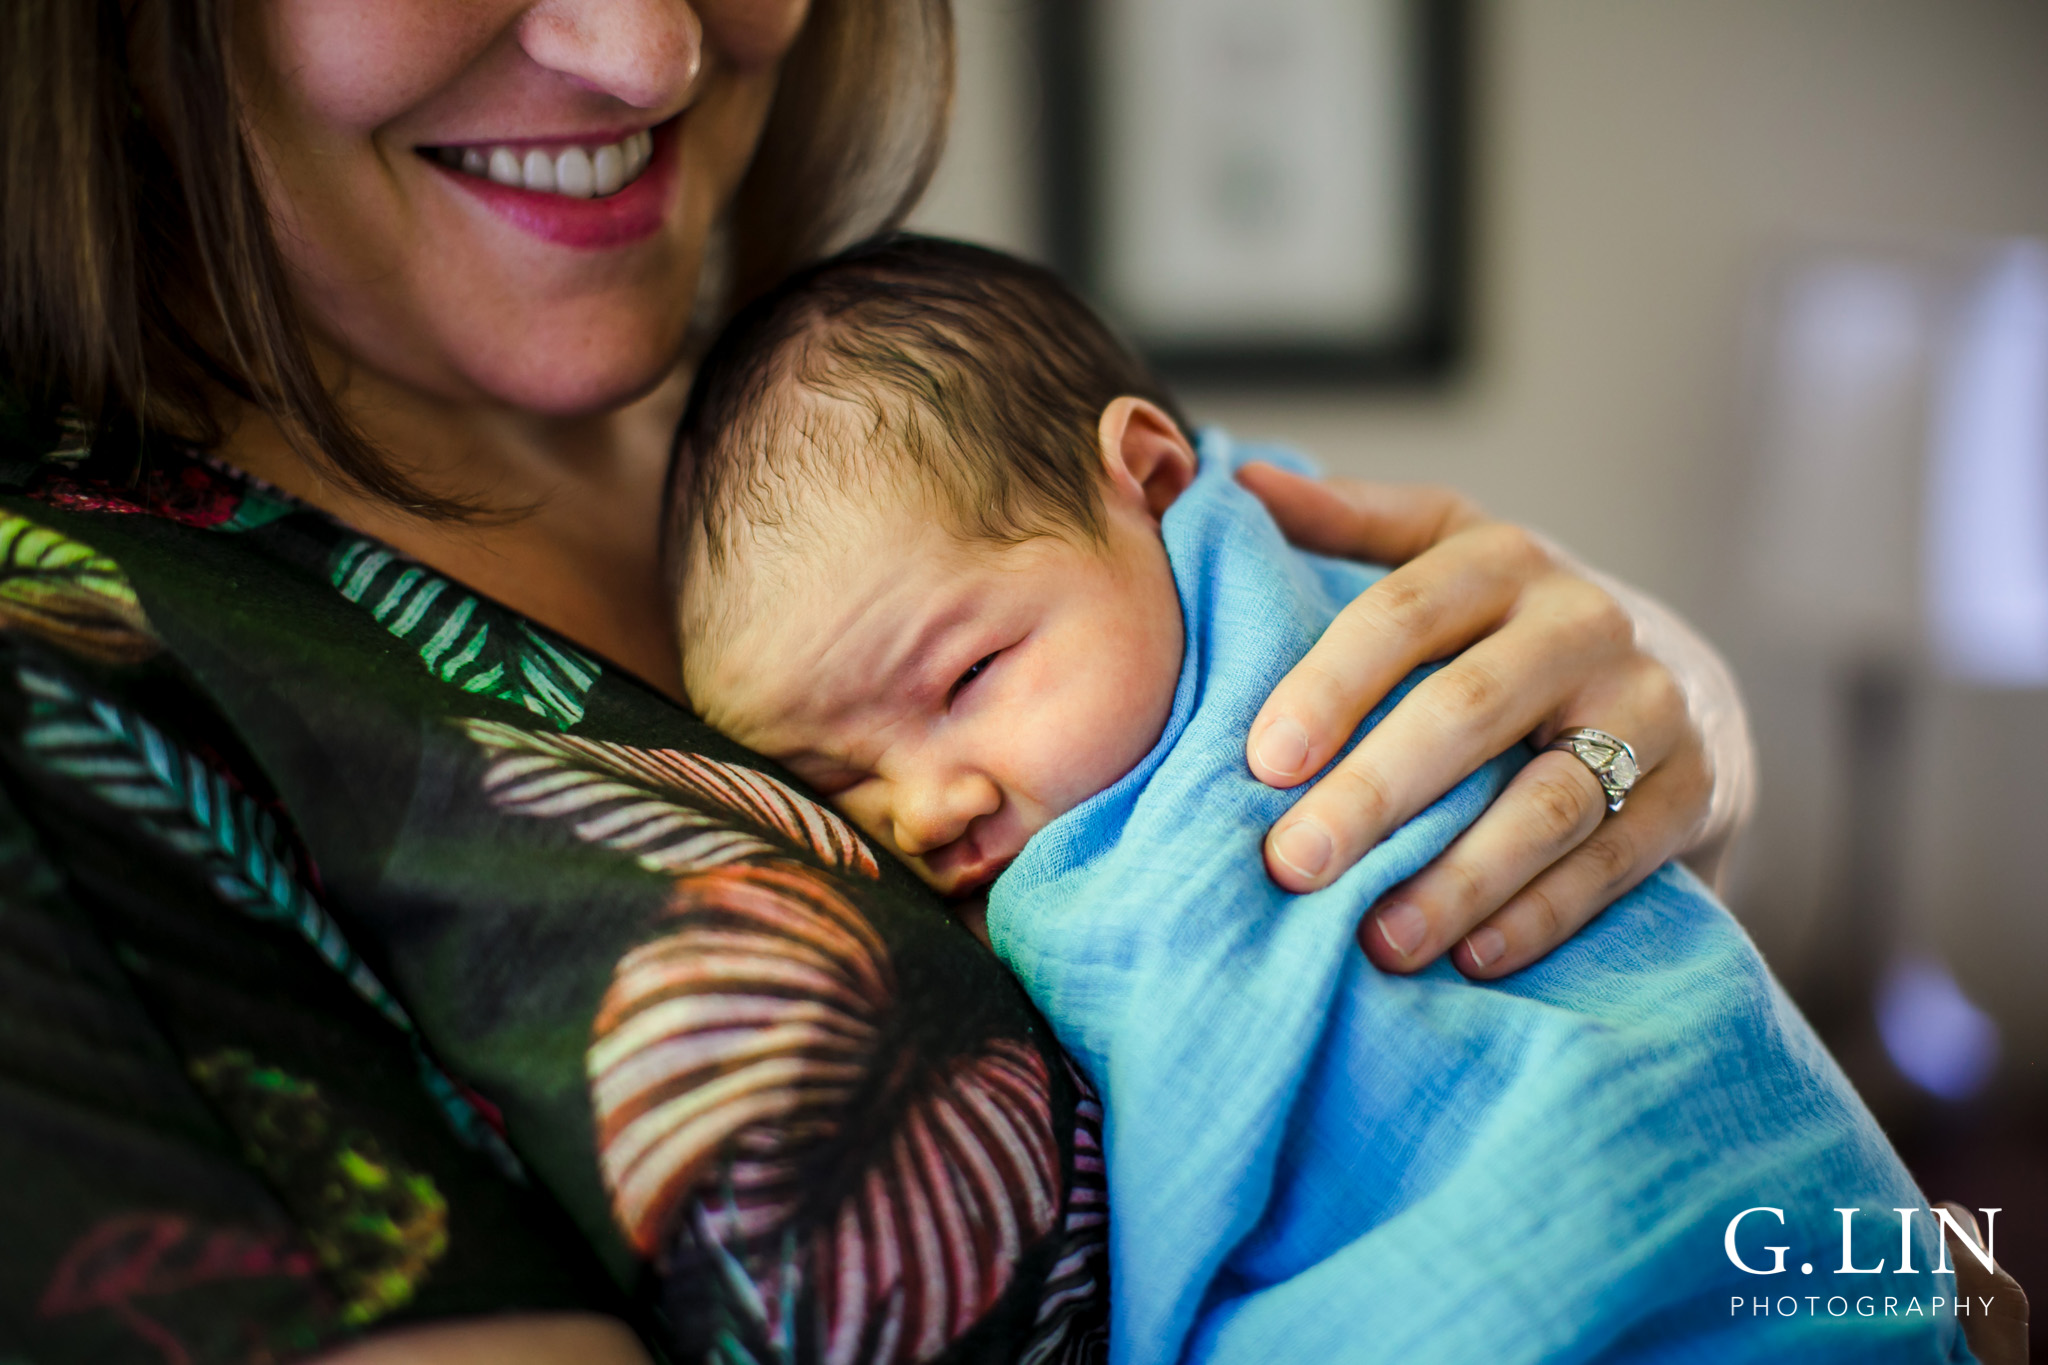 Raleigh Family Photographer | G. Lin Photography | Mother holding baby in bedroom